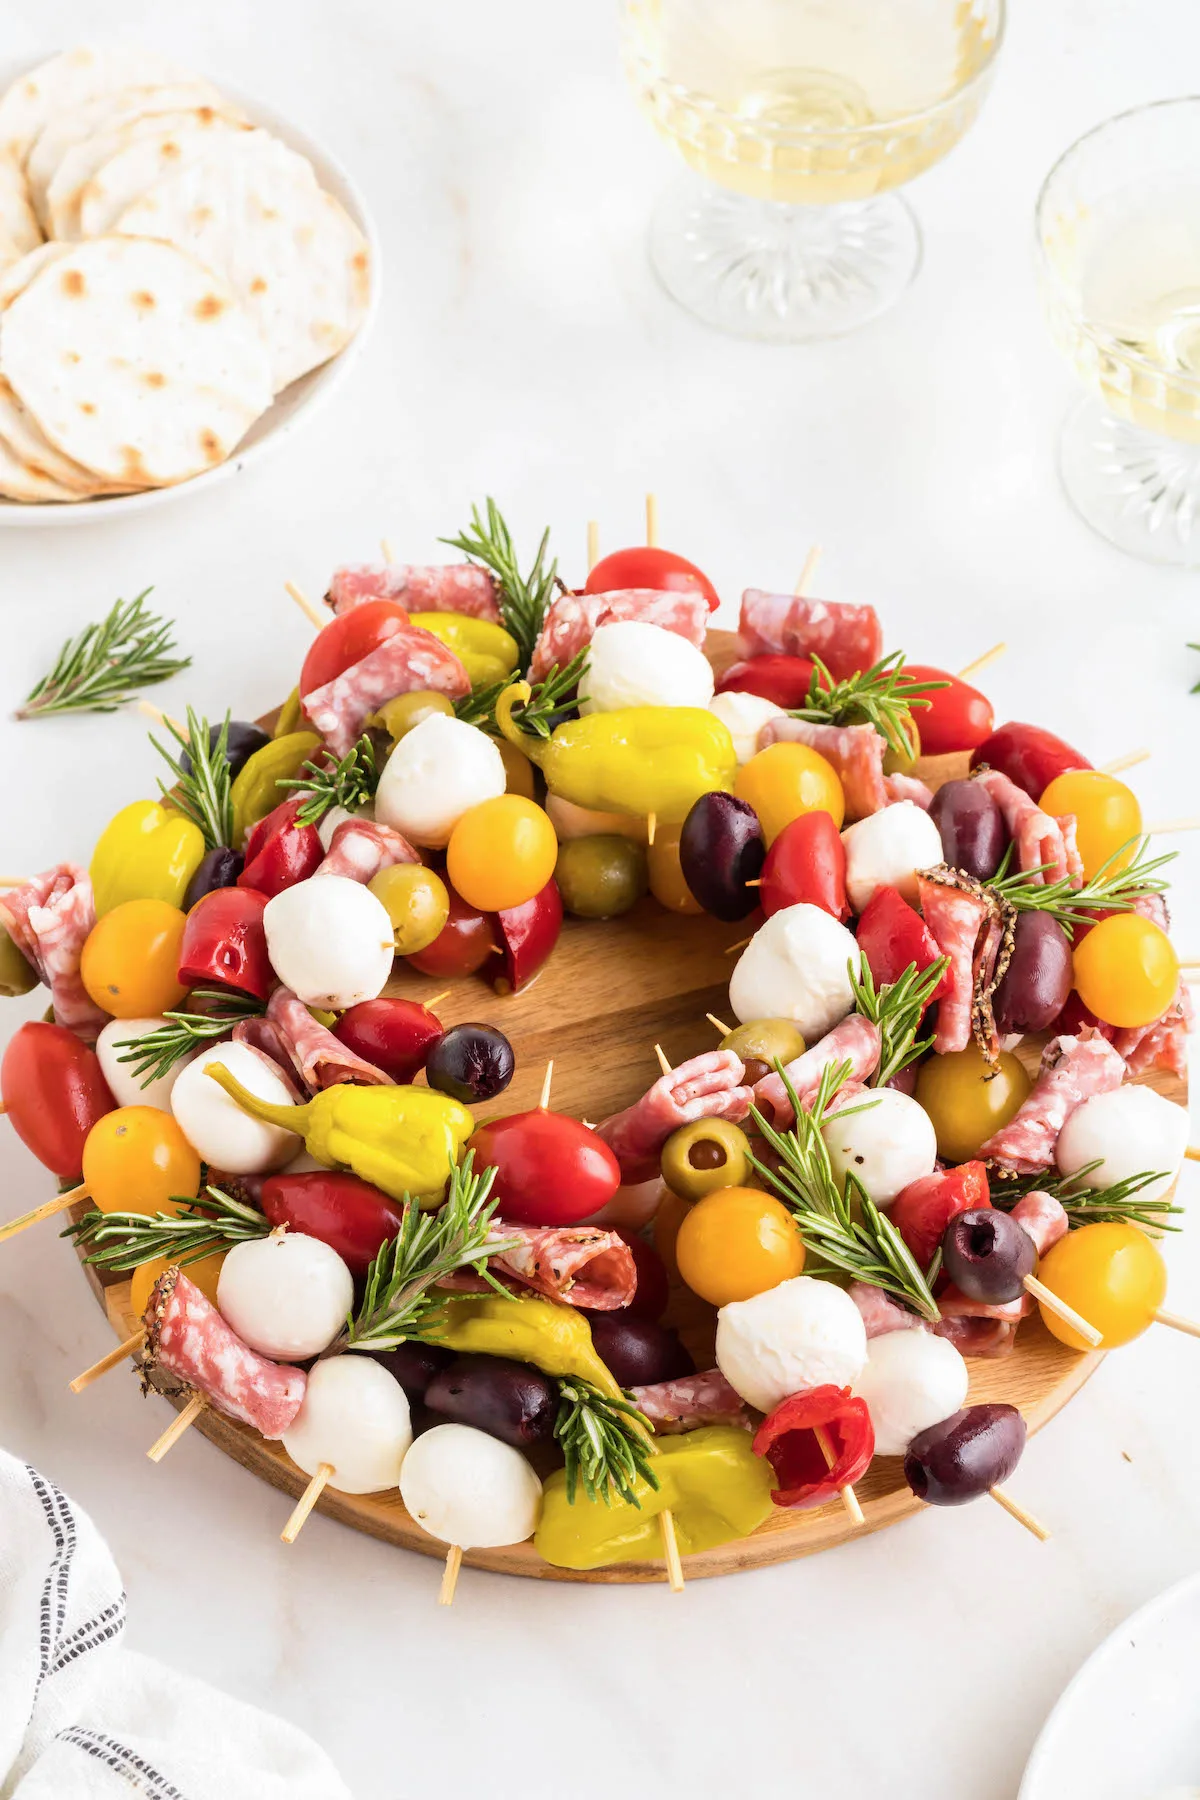 angled down photo of an antipasto wreath with grape tomatoes, olives, meats and fresh mozzarella balls